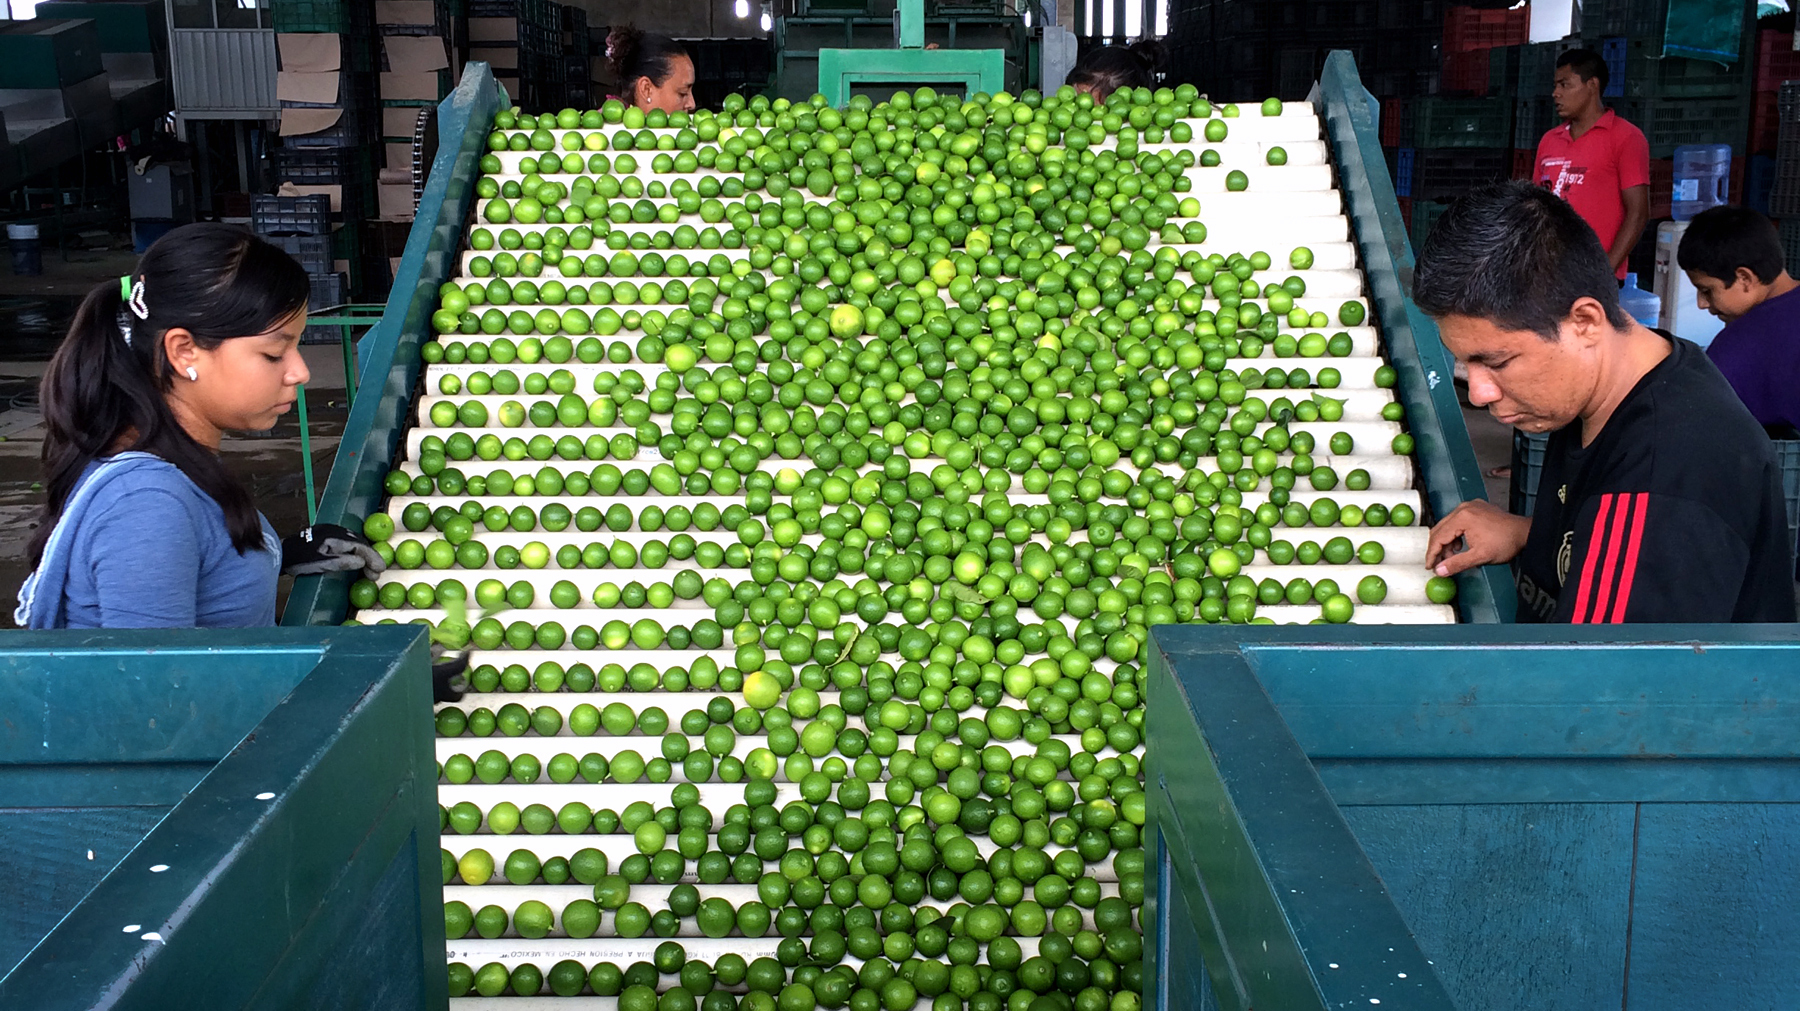 Workers sort through key limes at a packaging house in Apatzingan, Michoacan. More than 90 percent of limes imported into the U.S. come from Mexico. Photo: Carrie Kahn/NPR